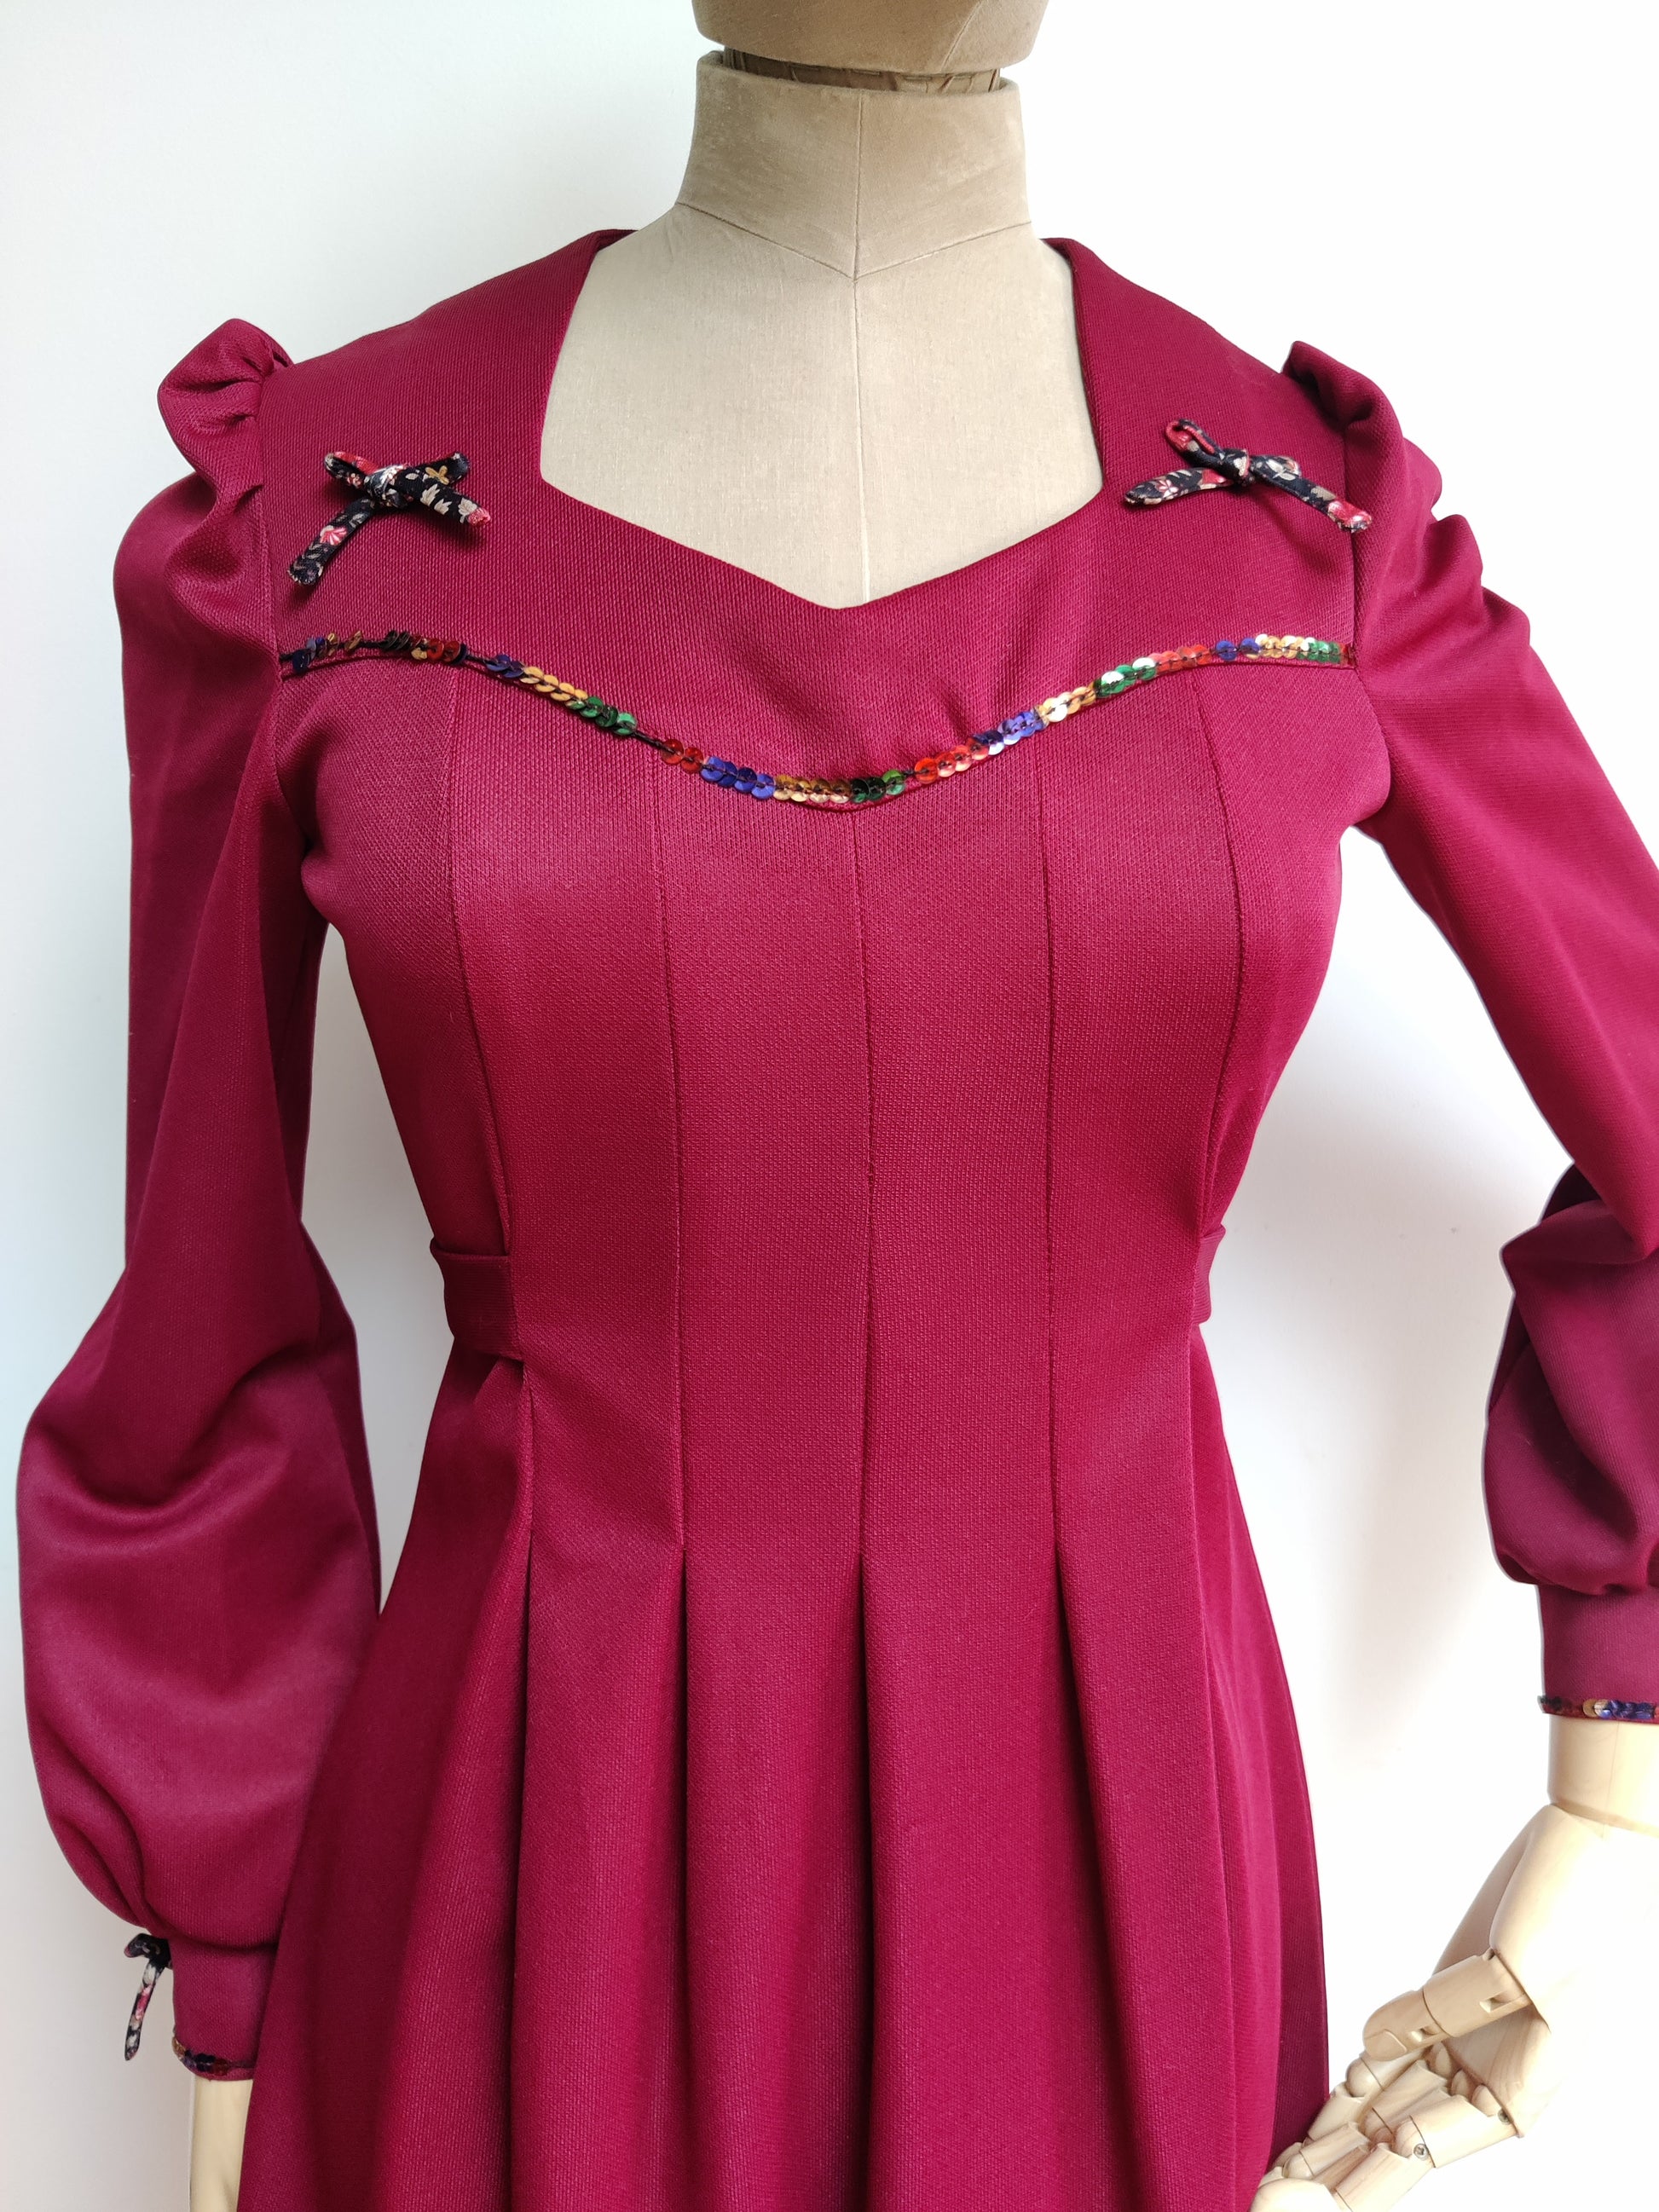 Stunning size 10 burgundy dress with pretty bows